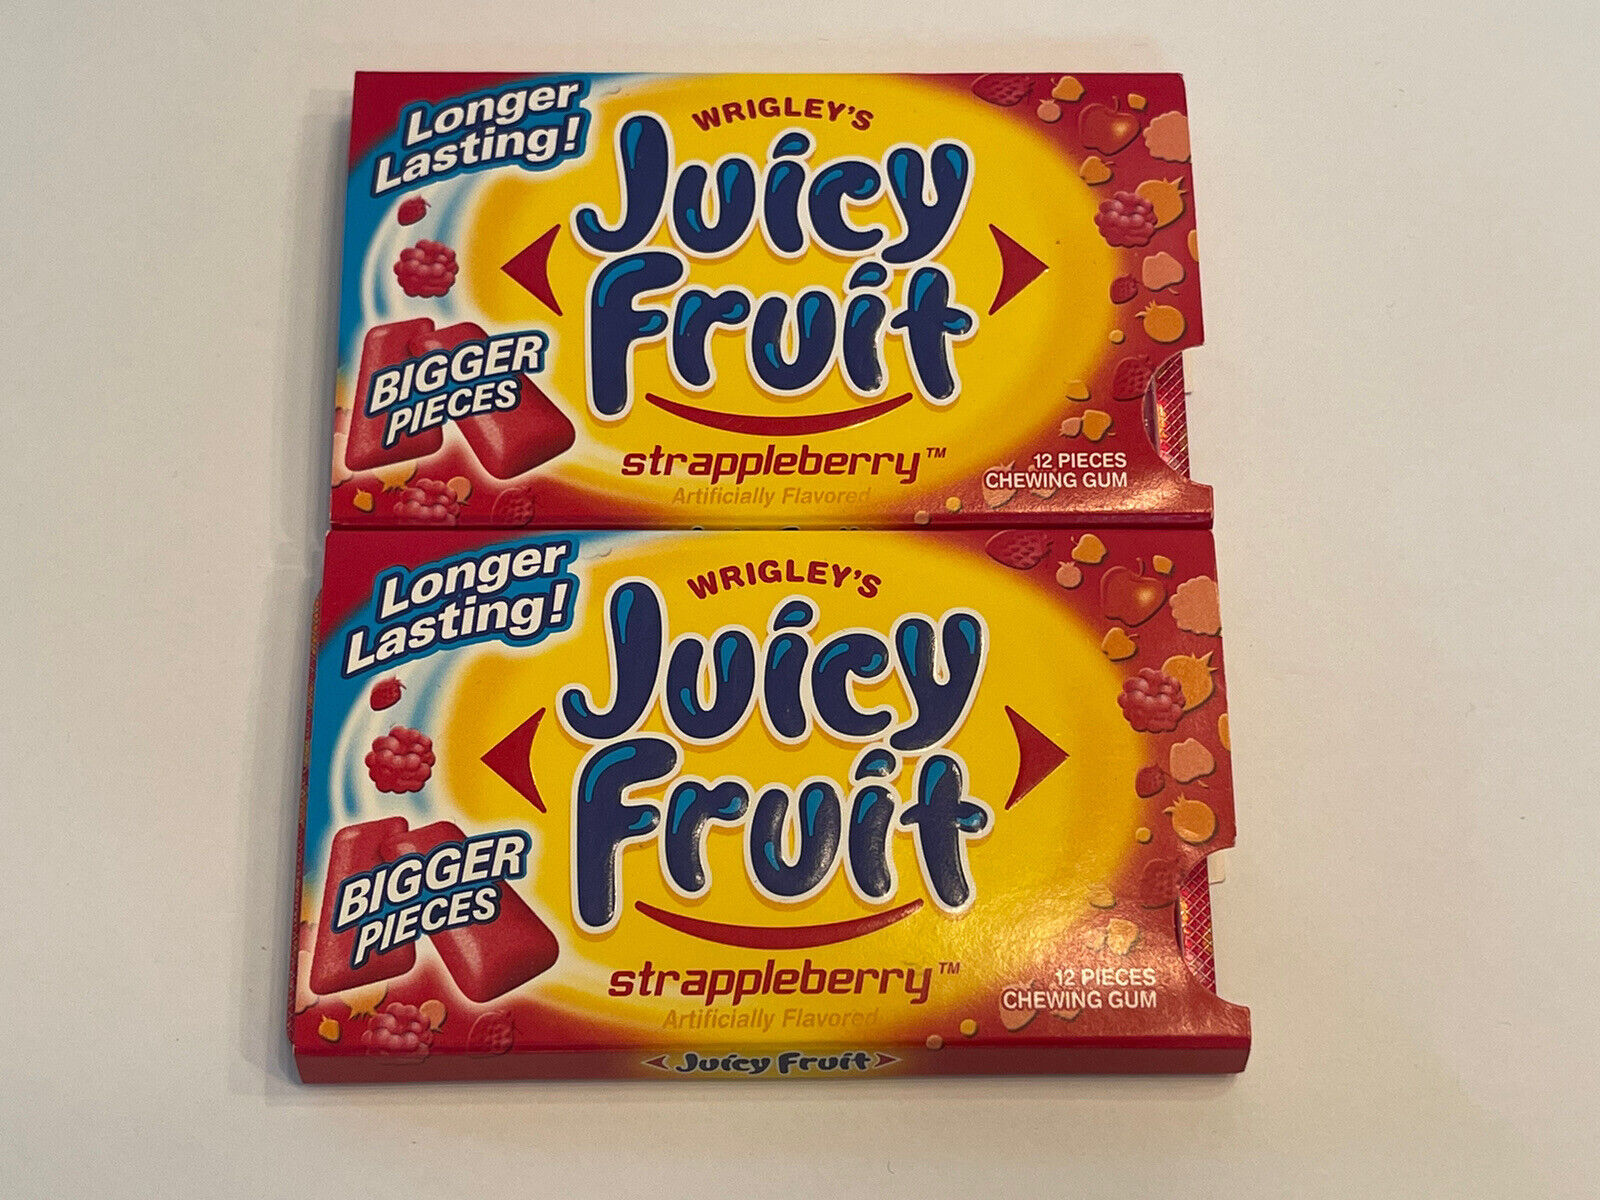 Wrigleys Juicy Fruit Strappleberry Gum Lot Of 2 Packs Discontinued